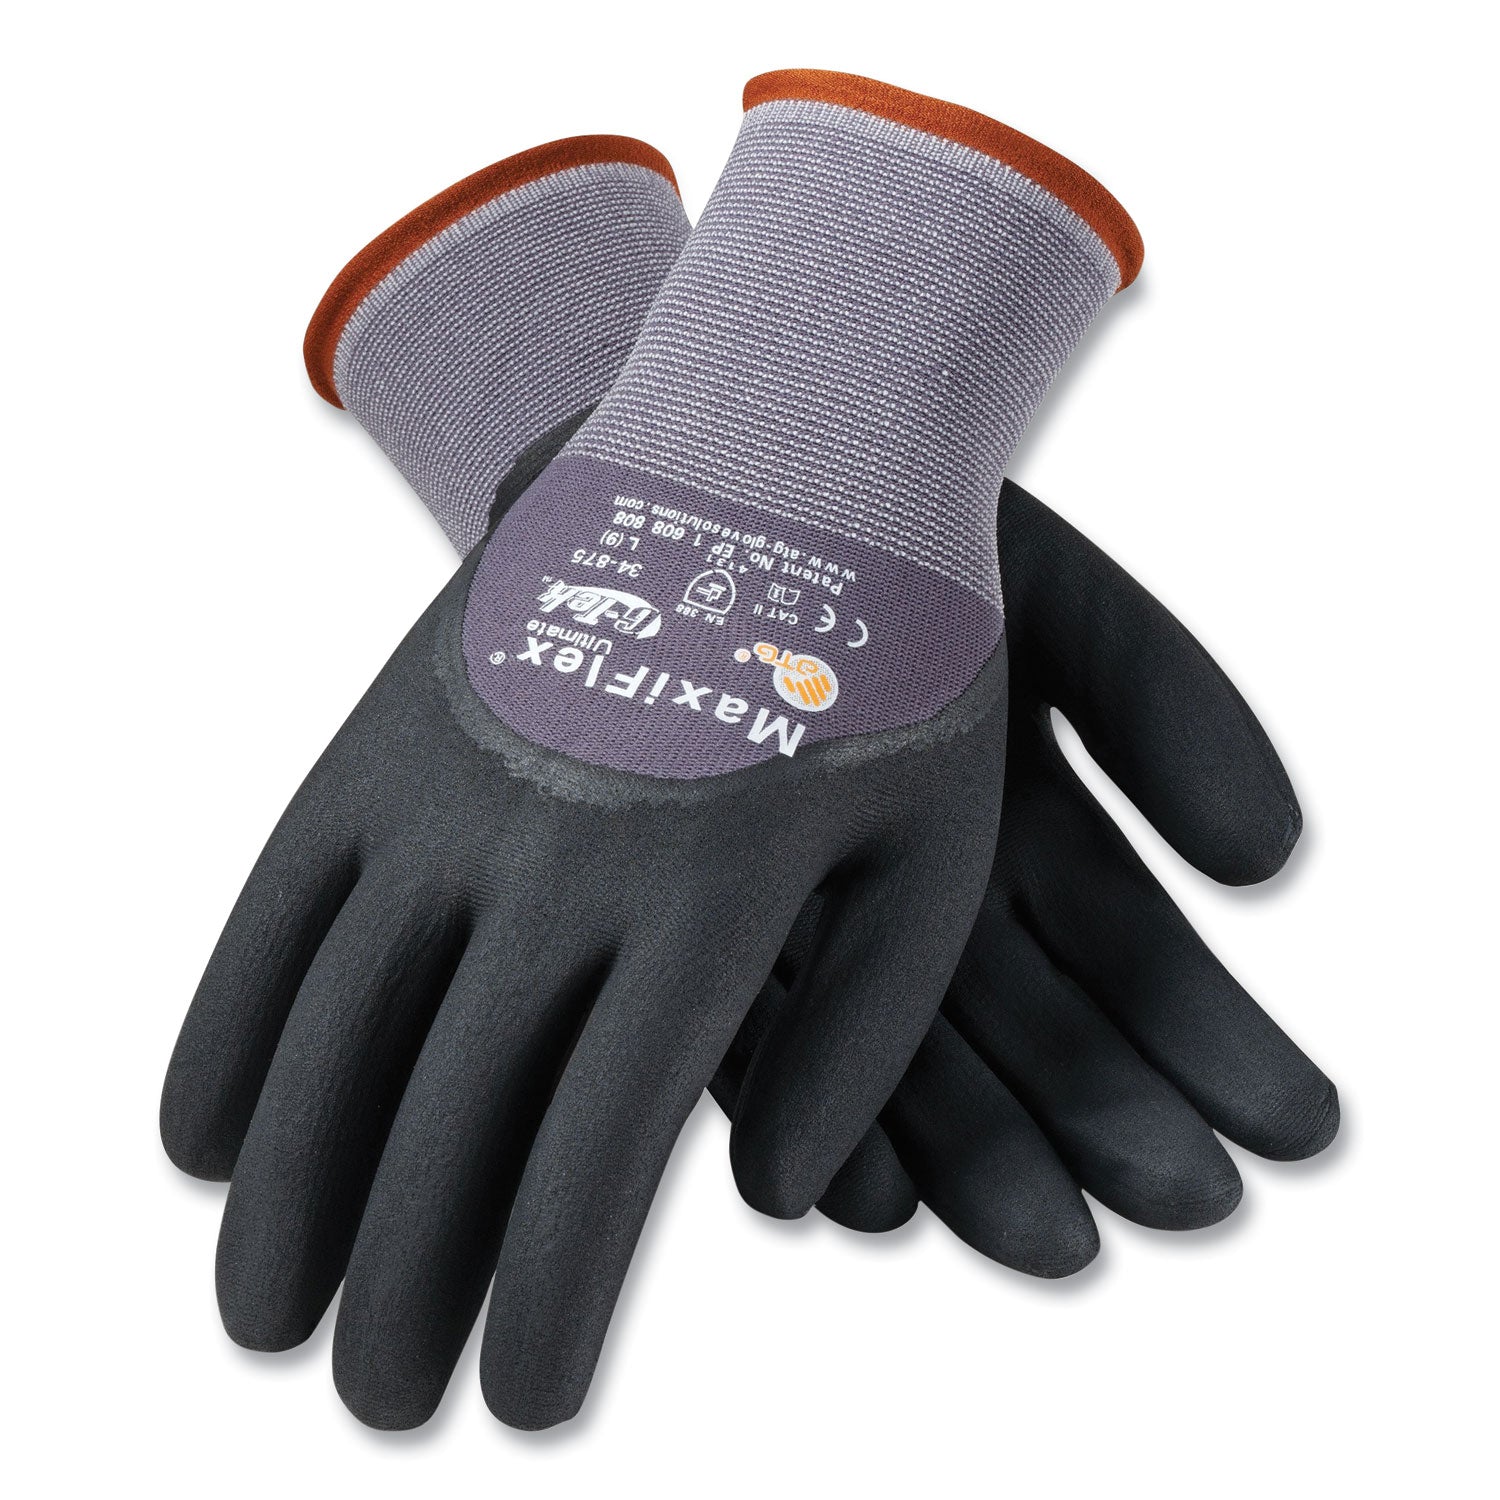 ultimate-seamless-knit-nylon-gloves-nitrile-coated-microfoam-grip-on-palm-fingers-and-knuckles-x-large-gray-12-pairs_pid34875xl - 1